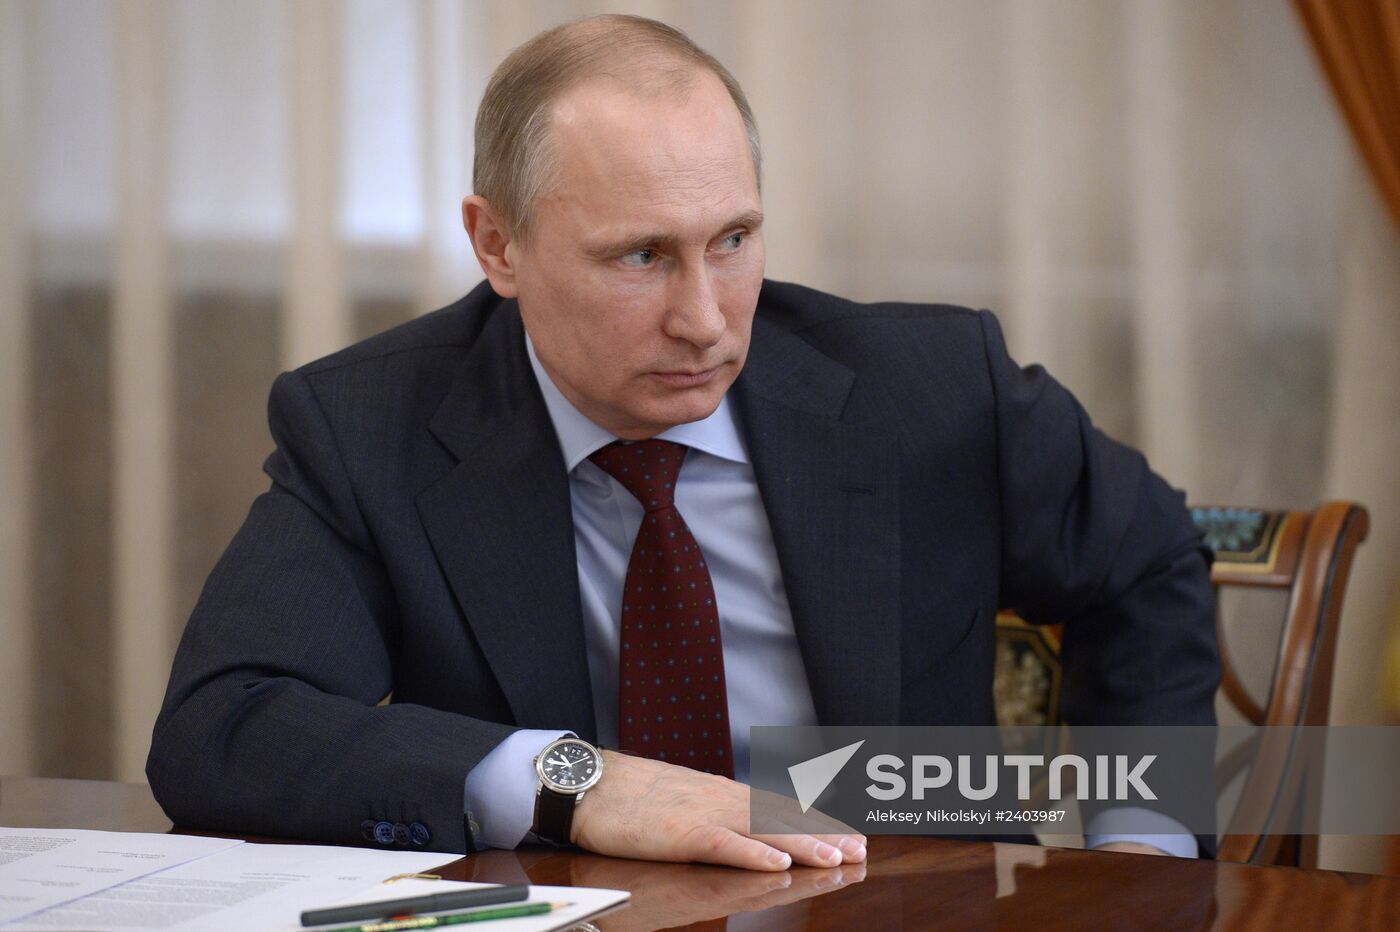 Vladimir Putin meets with senior members of the Federation Council